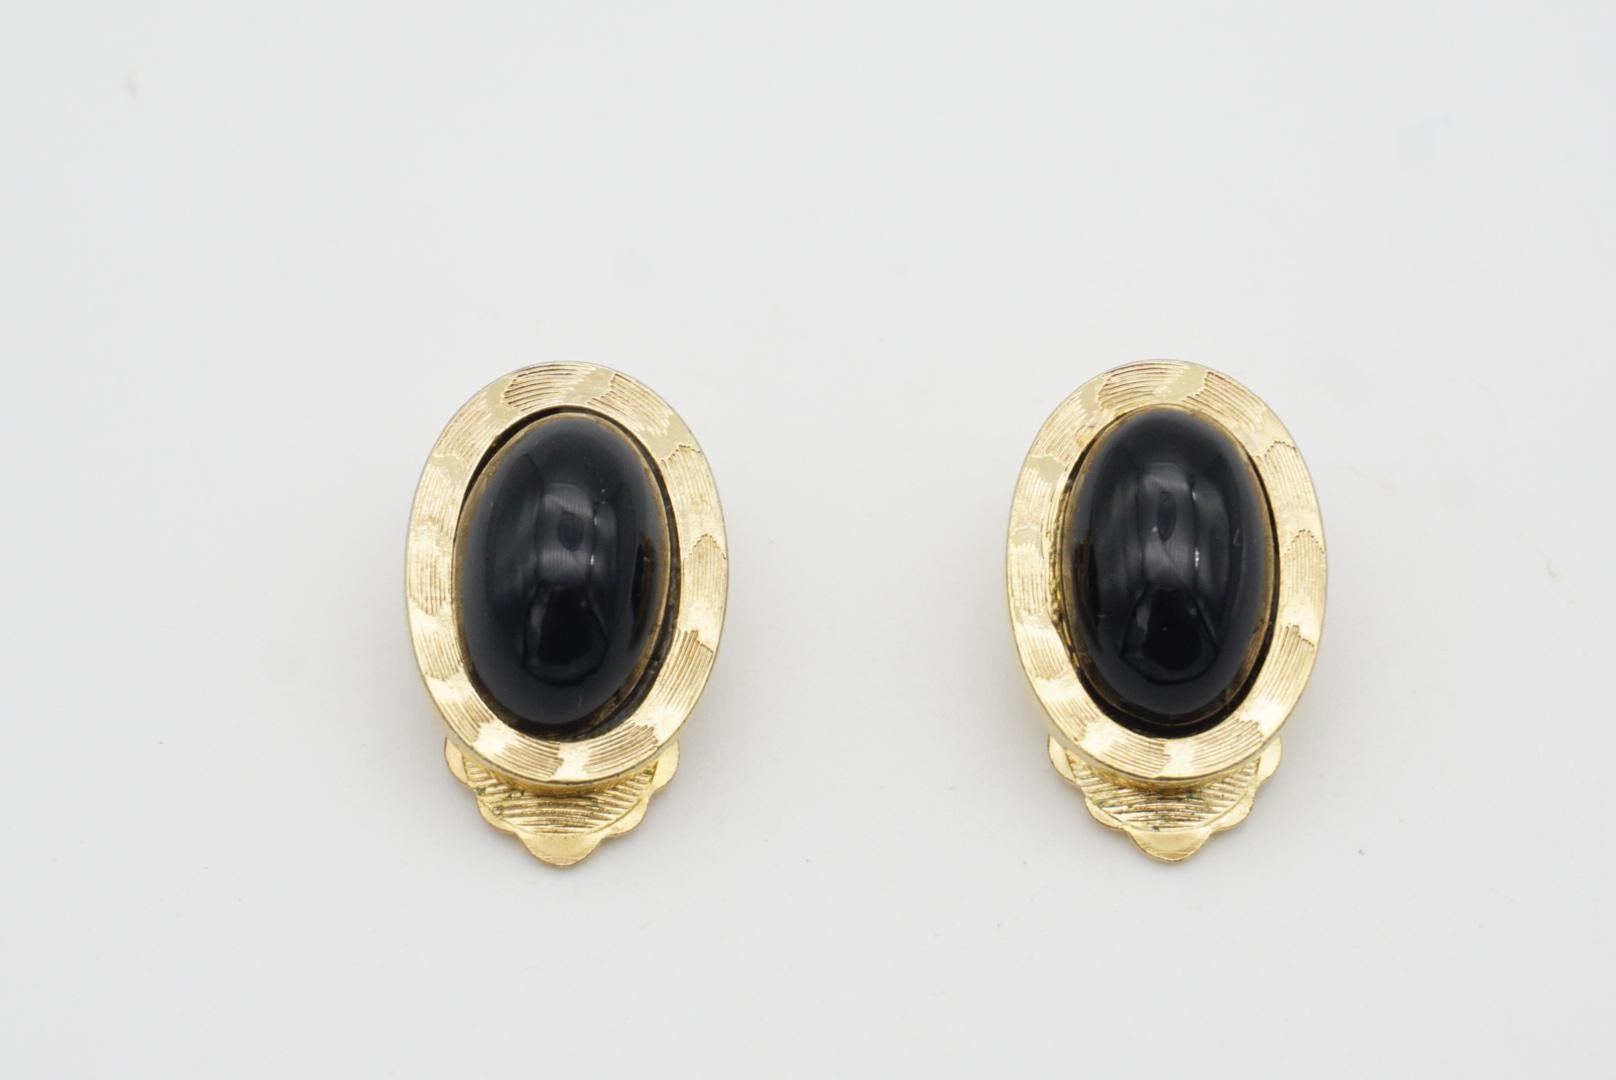 Christian Dior GROSSE 1963 Vintage Textured Black Oval Cabochon Clip Earrings In Excellent Condition For Sale In Wokingham, England